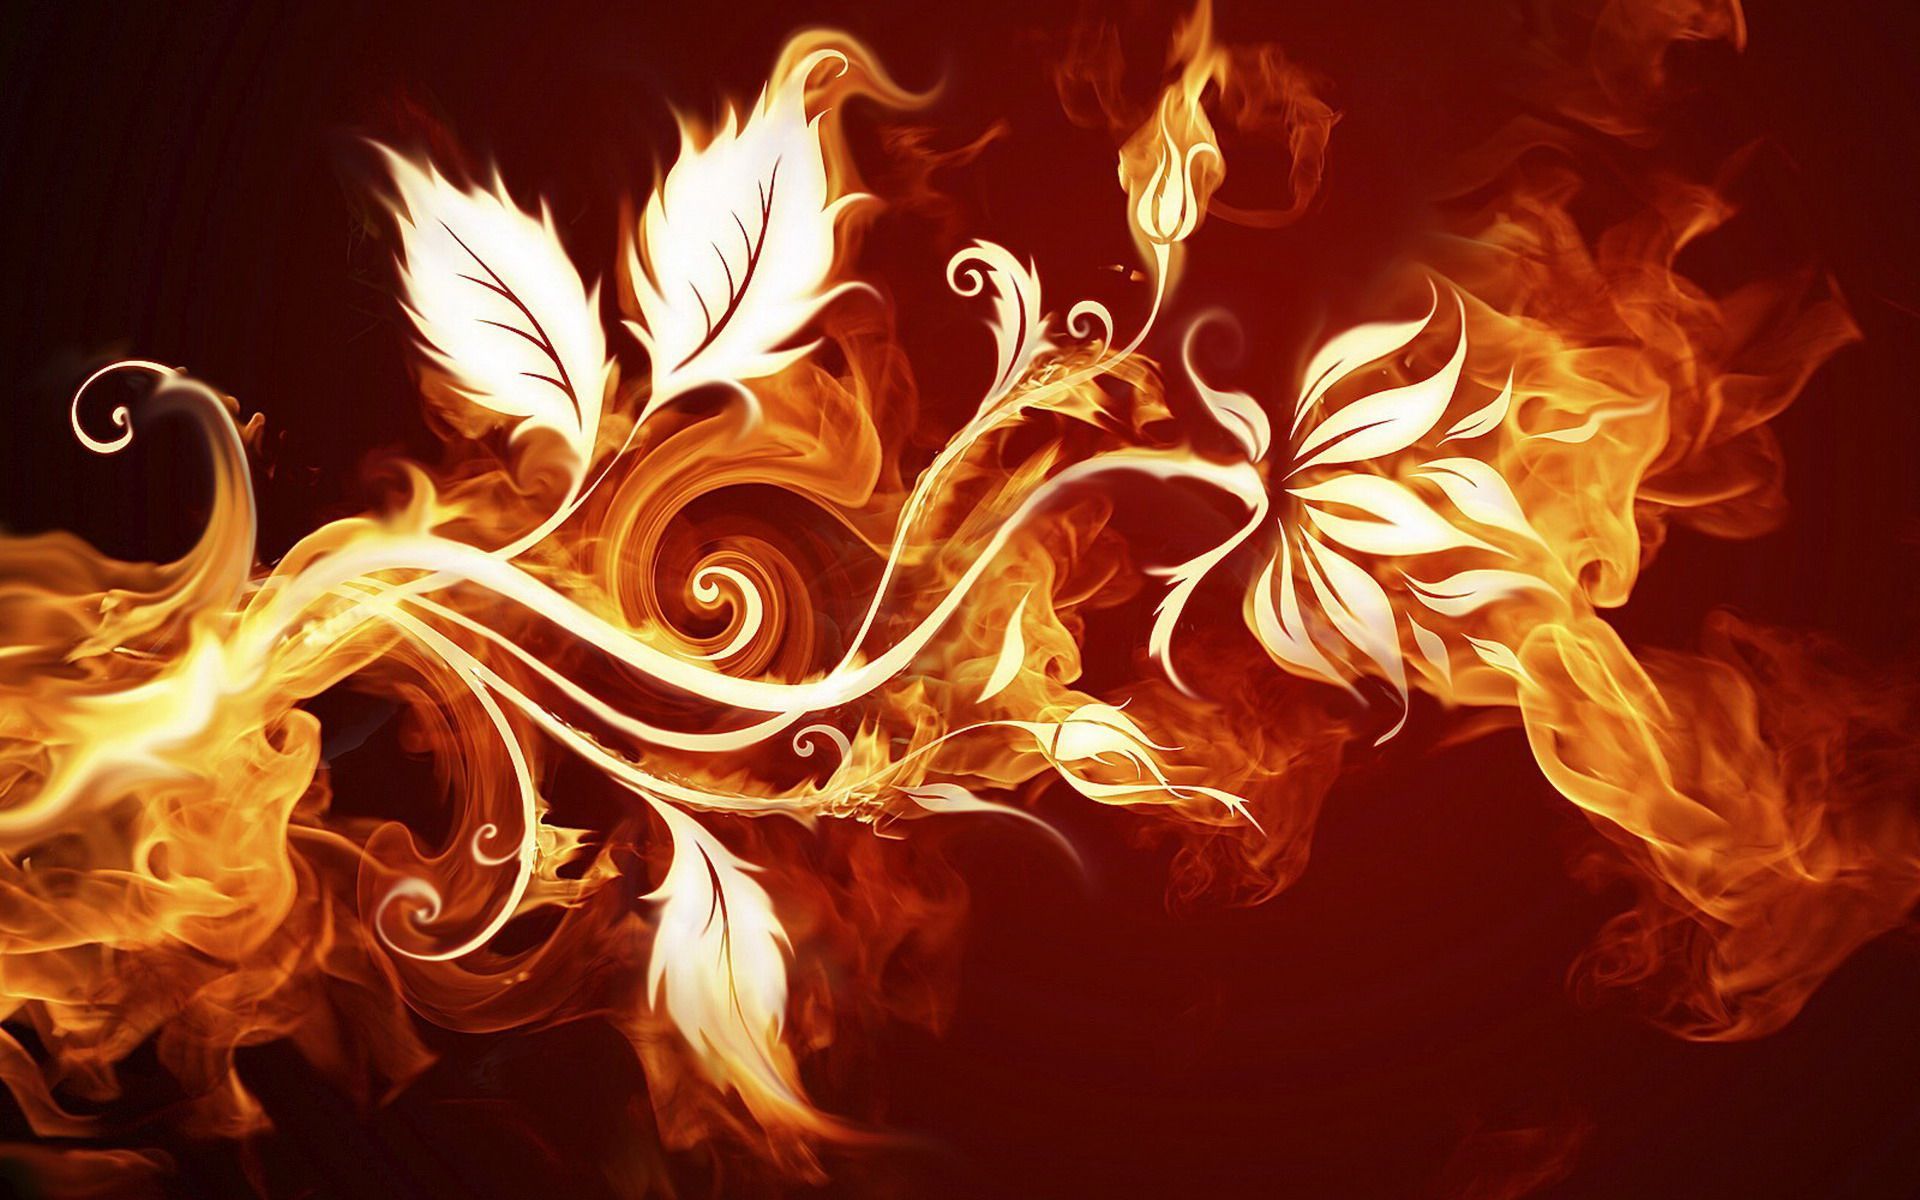 Abstract Fire Leaves and Flowers Wallpaper for Desktop